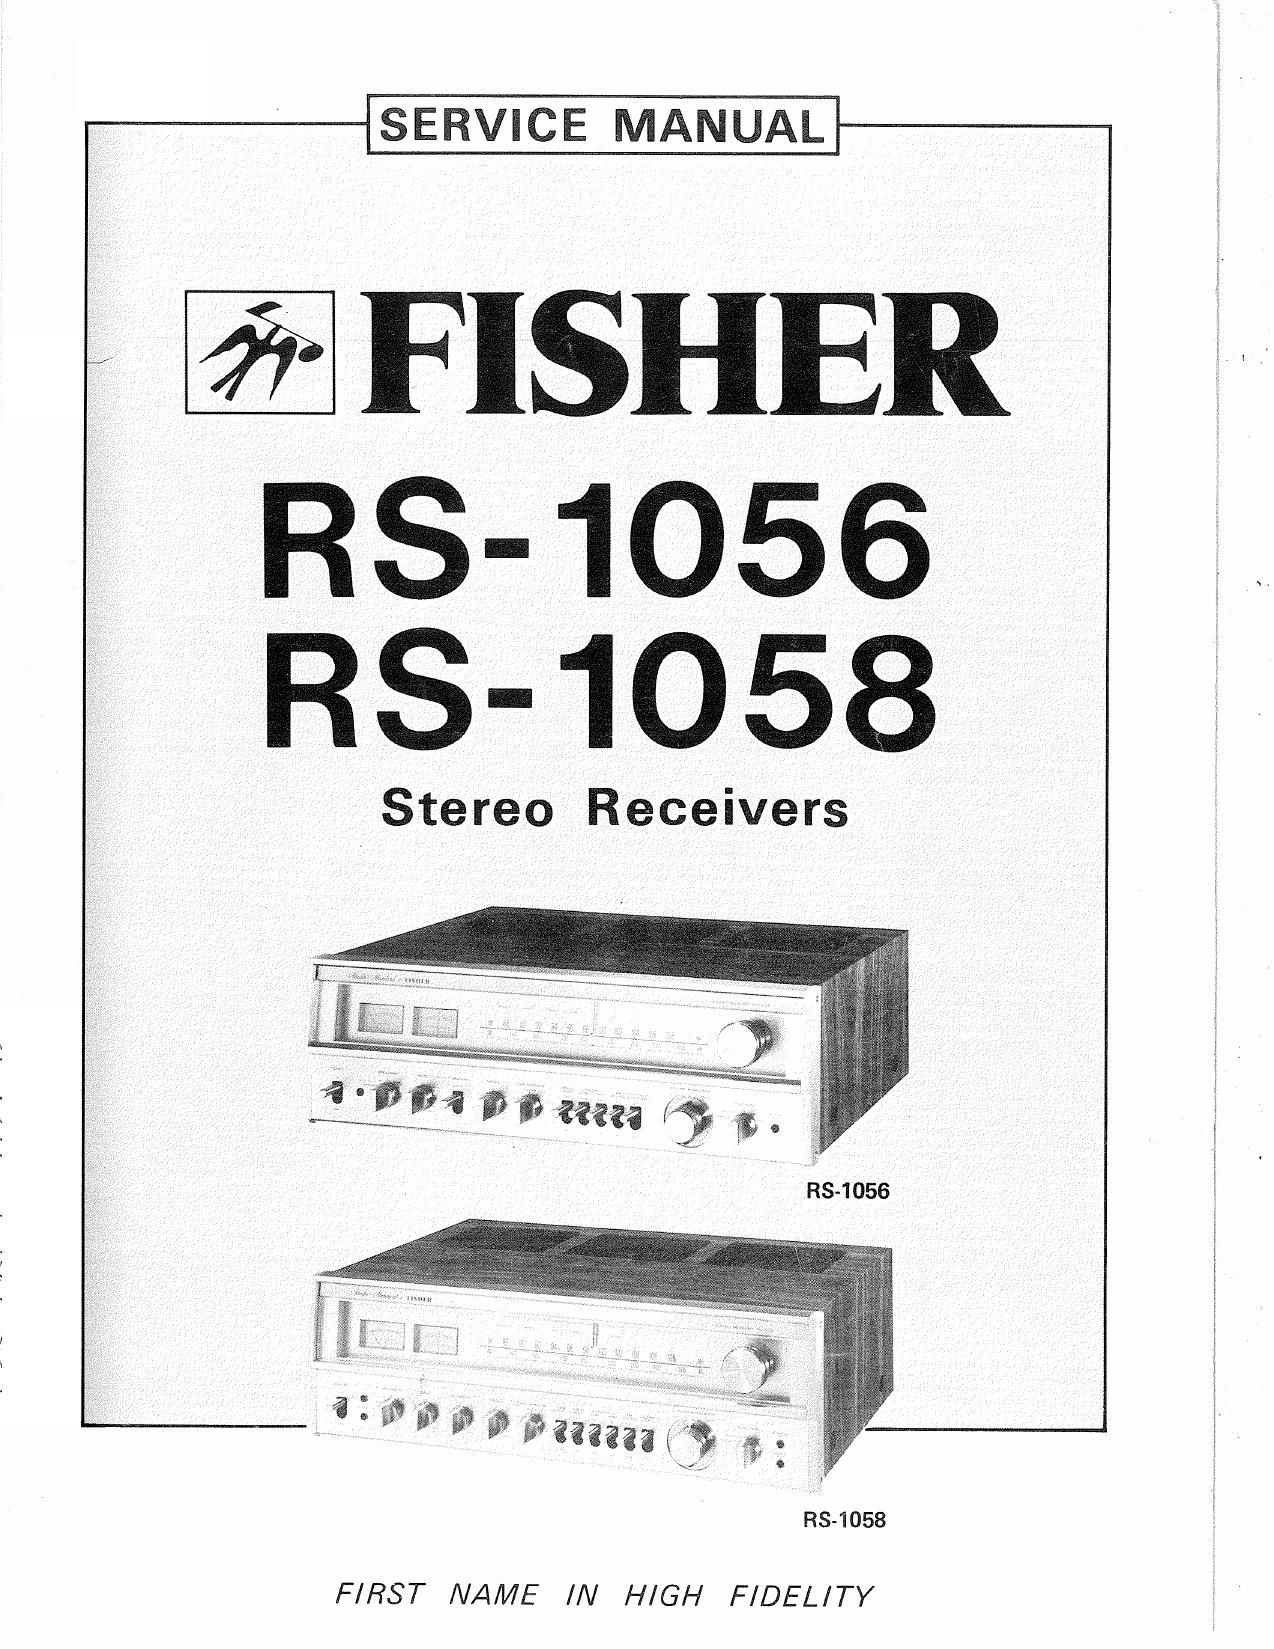 Service Manual-Anleitung für Fisher RS-1022 